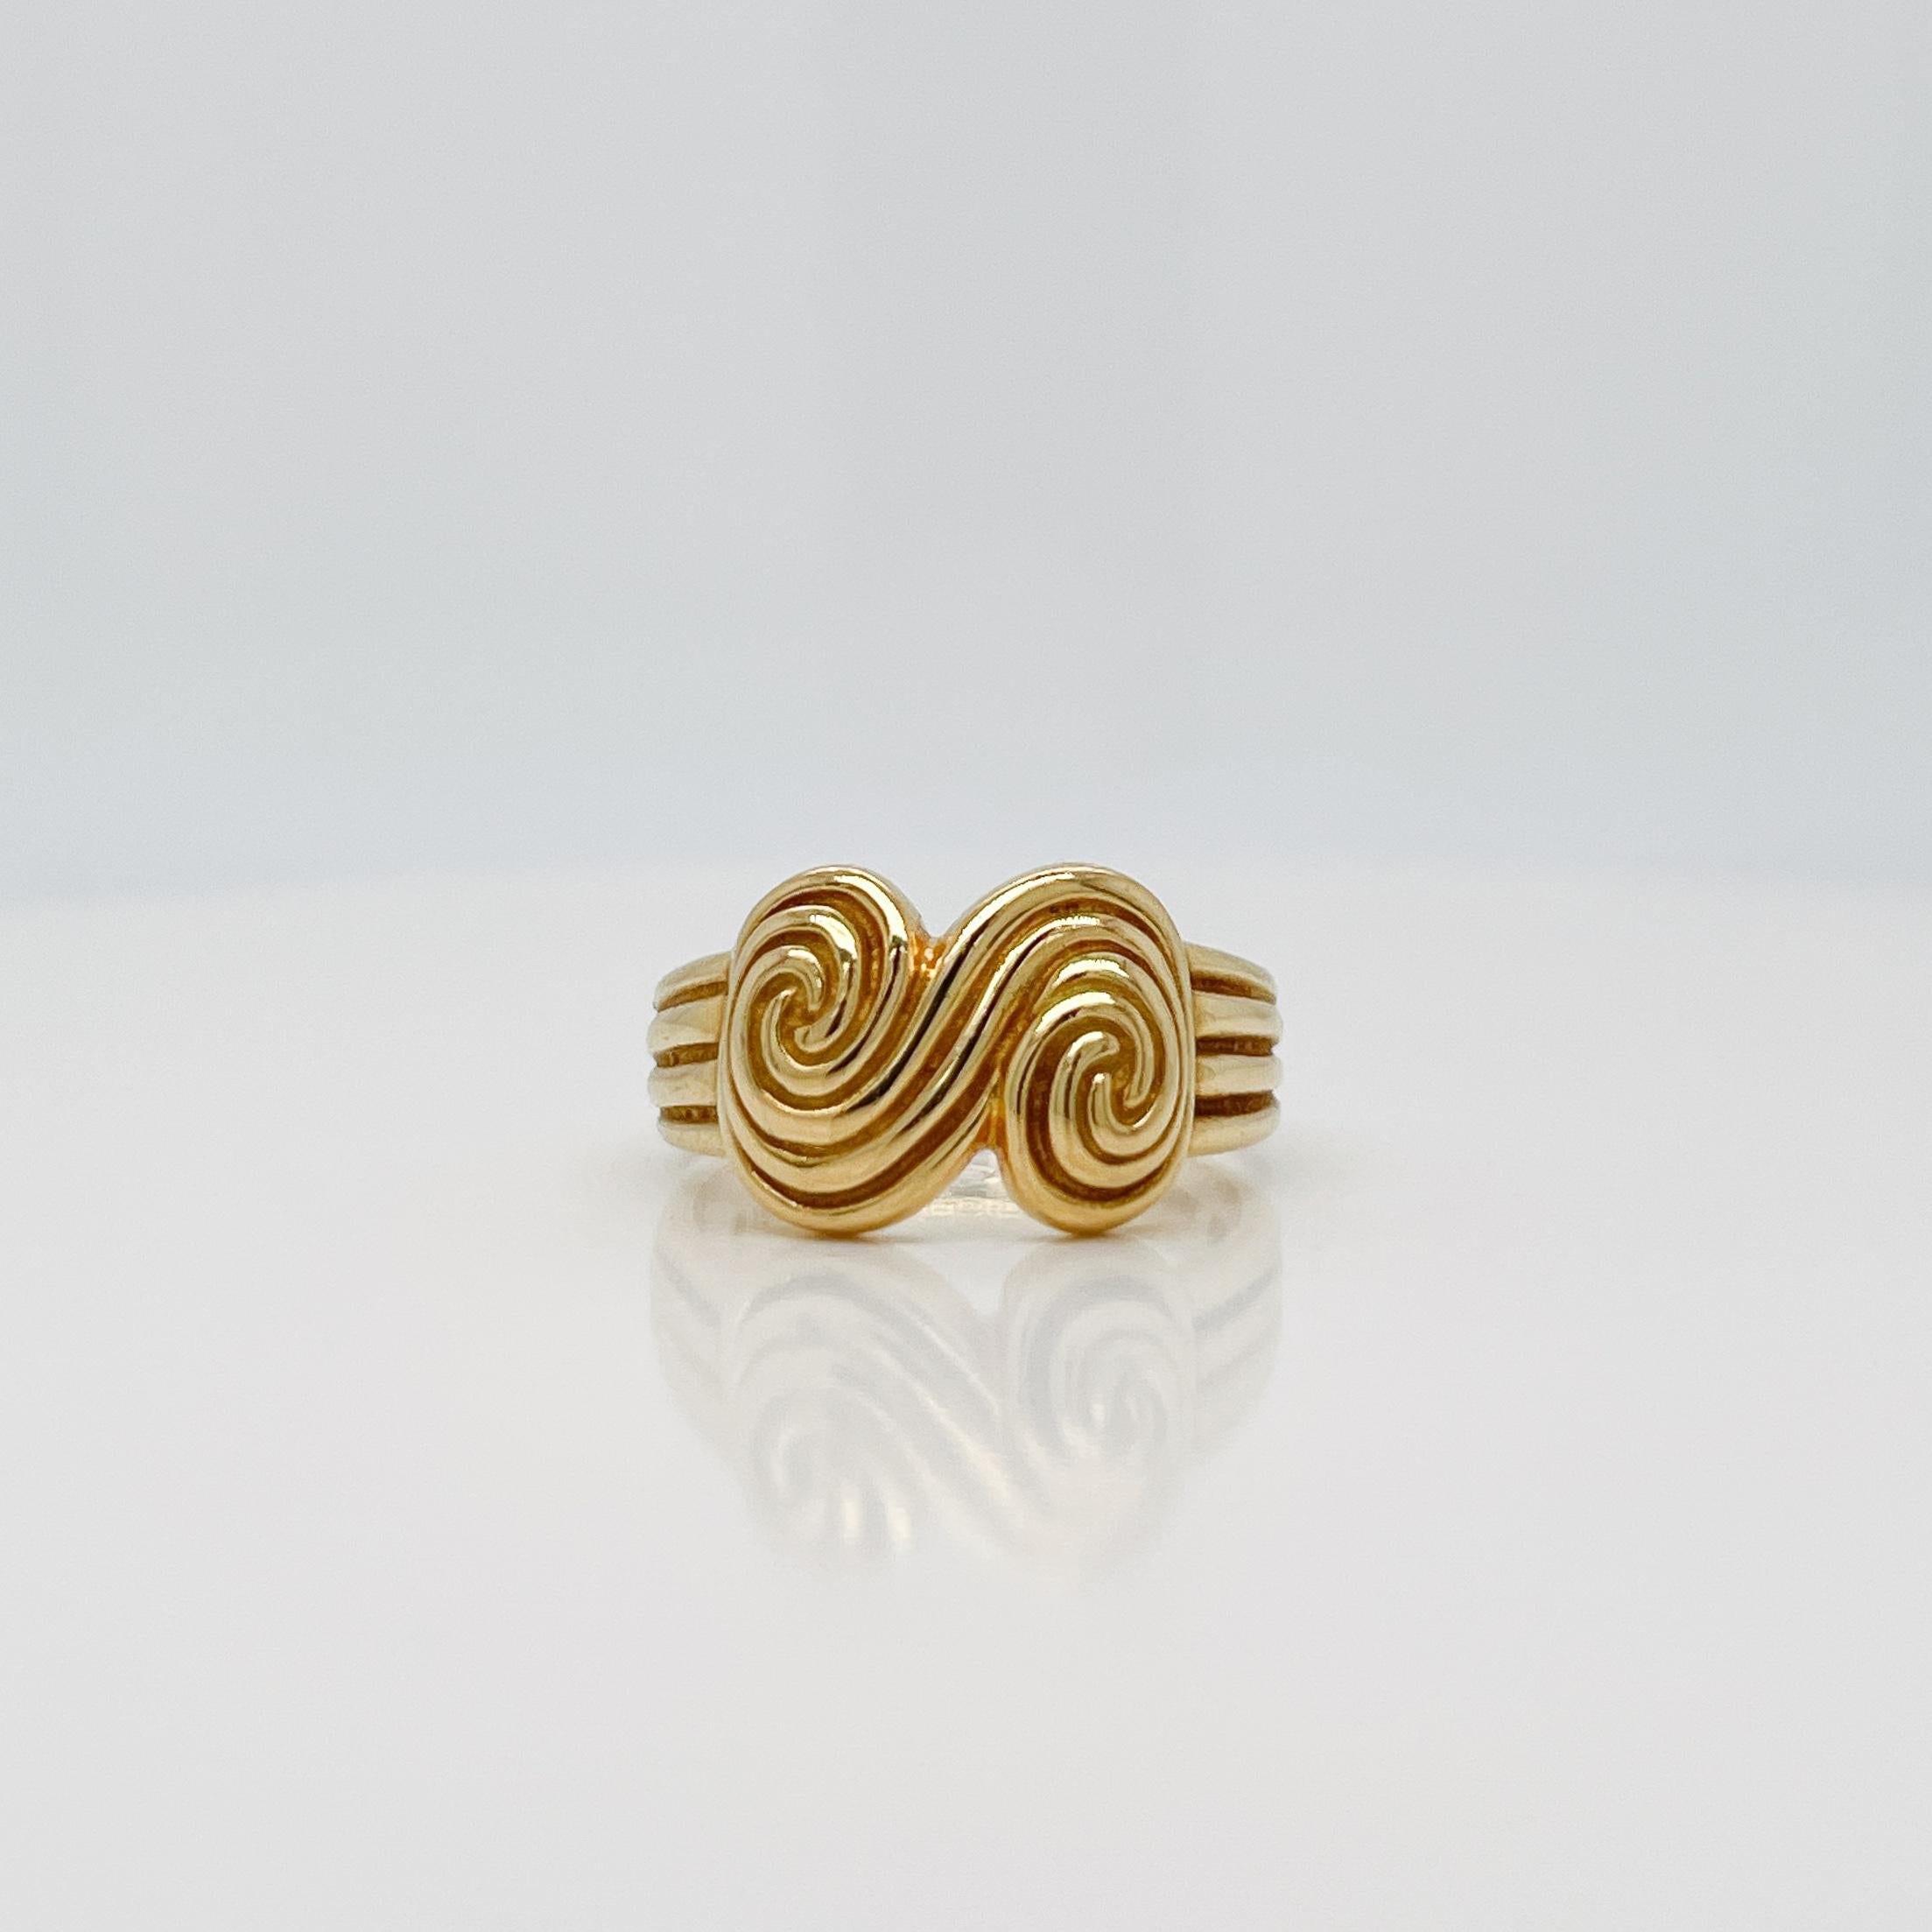 A very fine vintage 'Spiro Swirl' ring.

By Tiffany & Co.

In 18k yellow gold.

Simply a great modern form!

Date:
1990s

Overall Condition:
It is in overall good, as-pictured, used estate condition with some fine & light surface scratches and other